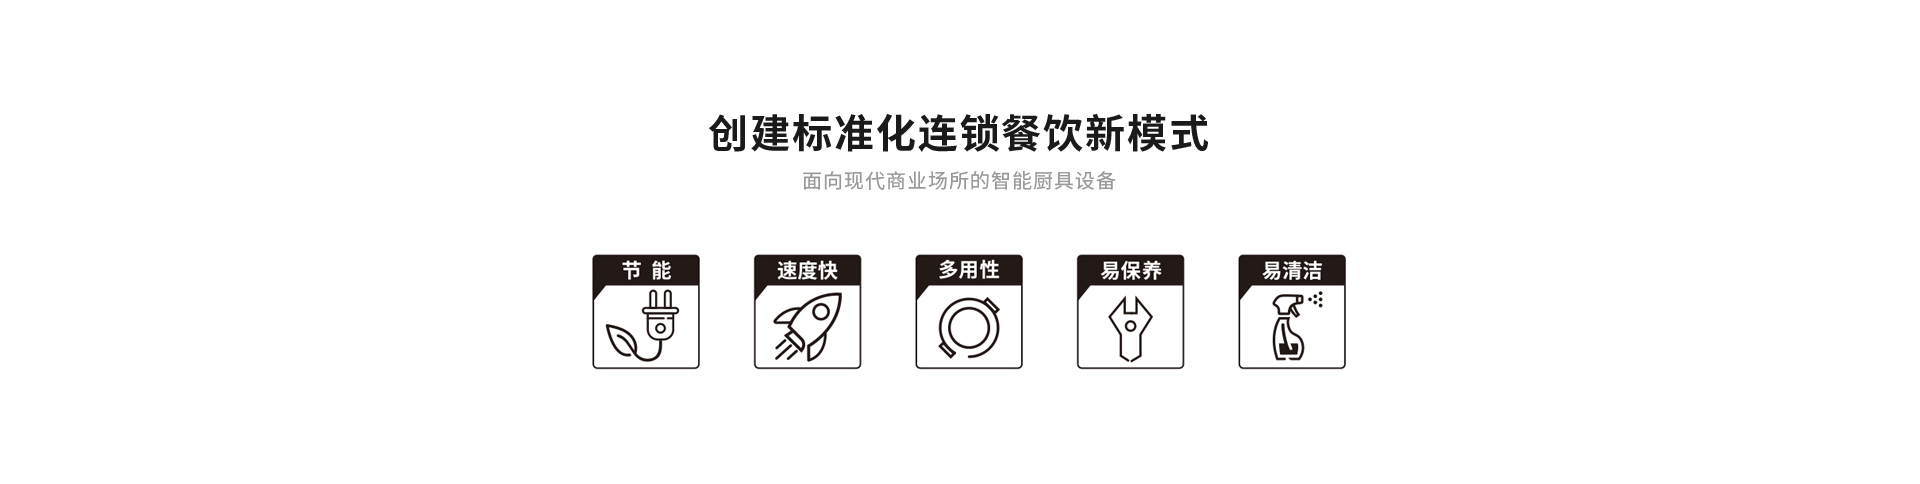 xinsiwei_combination_clay_pot_stove_details_page_performance.jpg